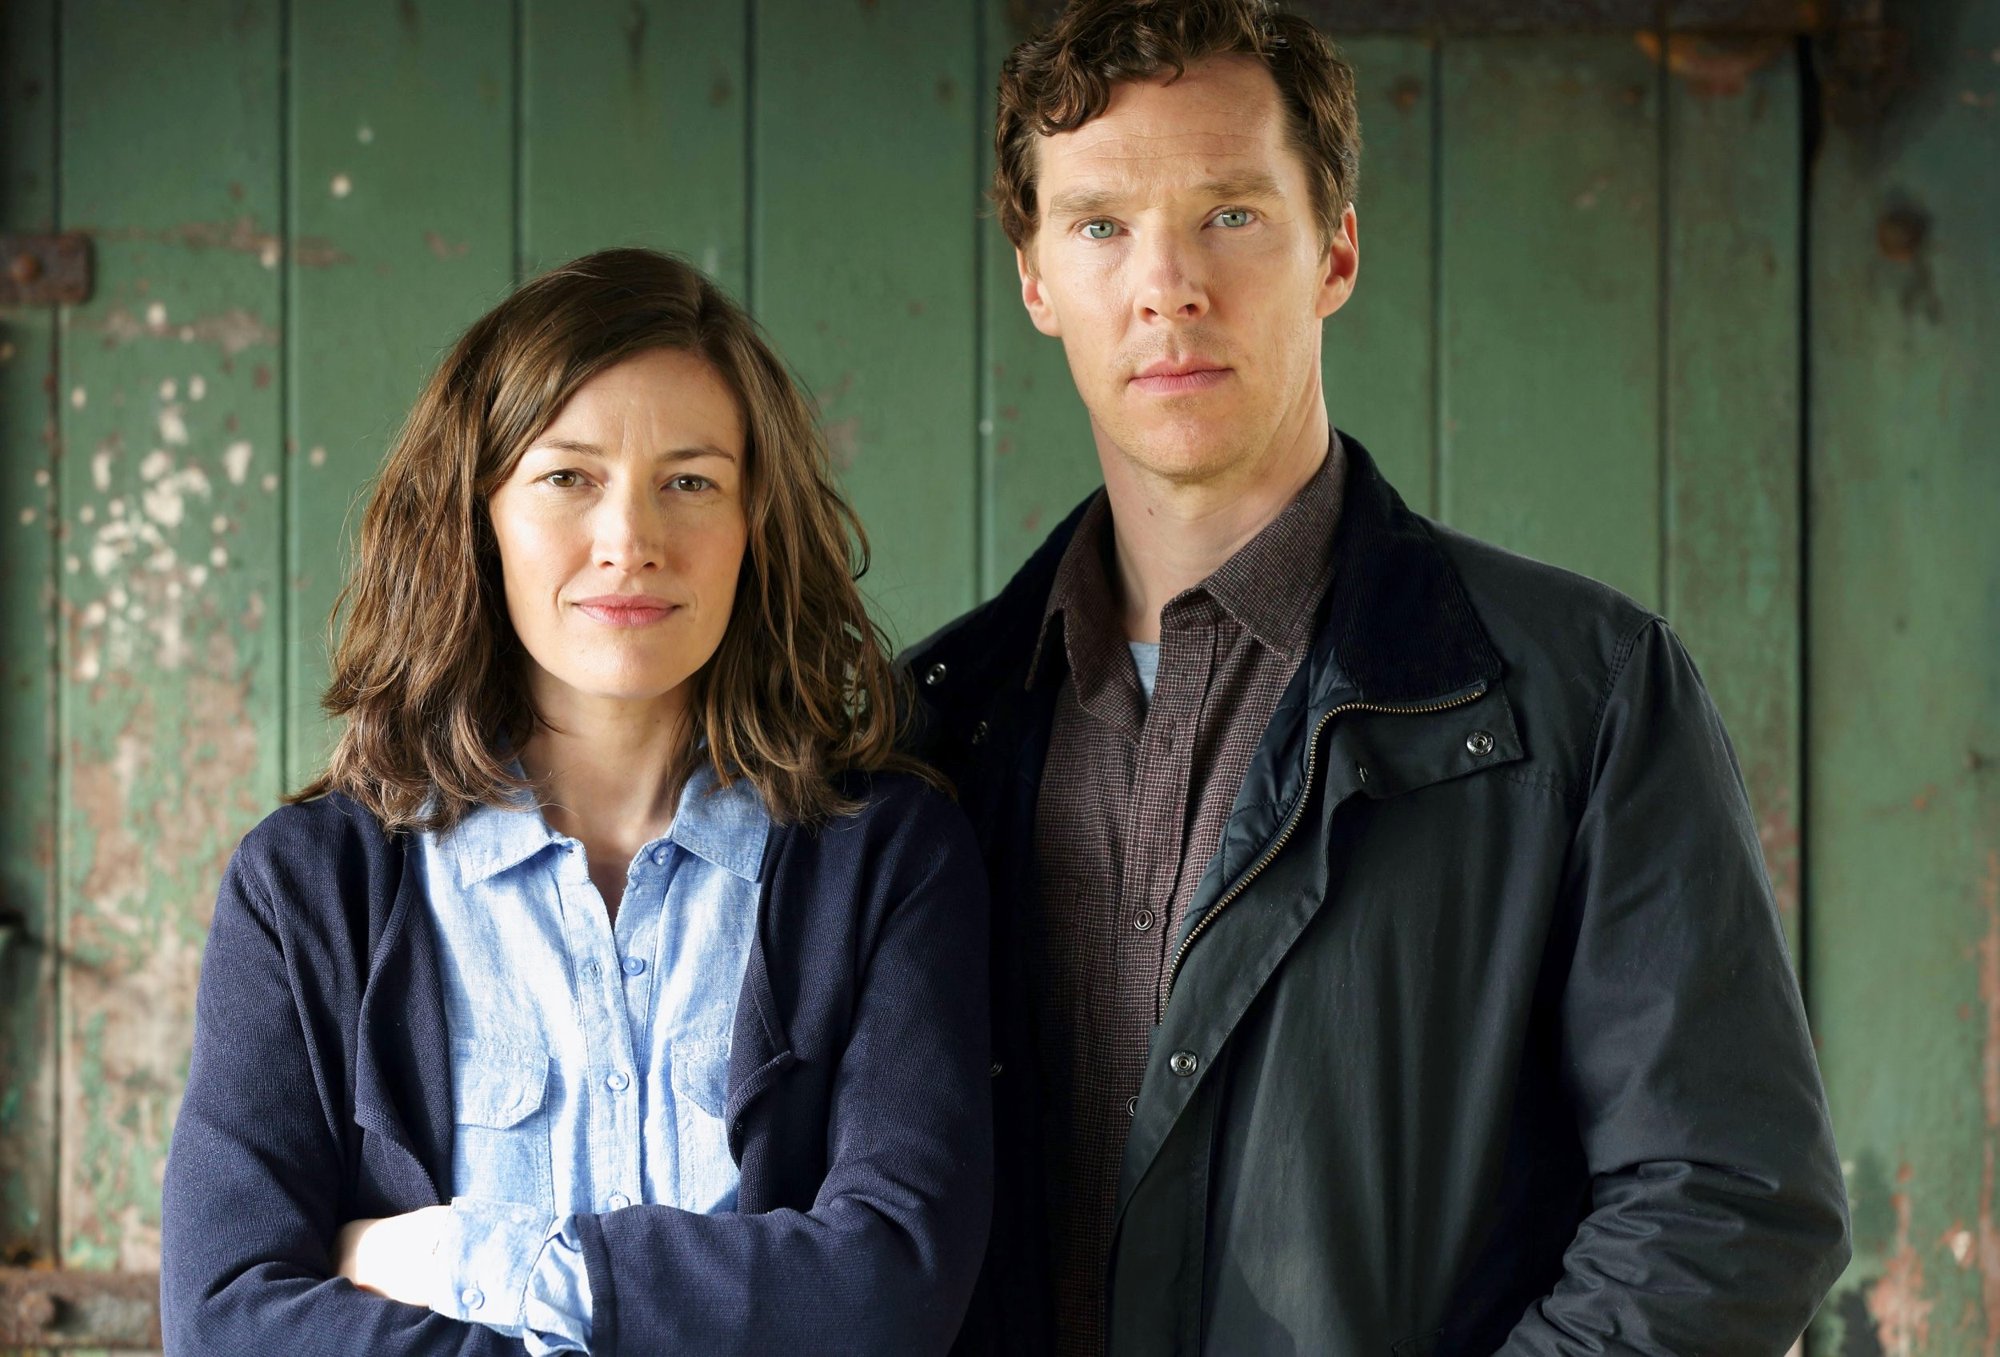 Kelly Macdonald stars as Julie and Benedict Cumberbatch stars as Stephen Lewis in PBS' The Child in Time (2018)